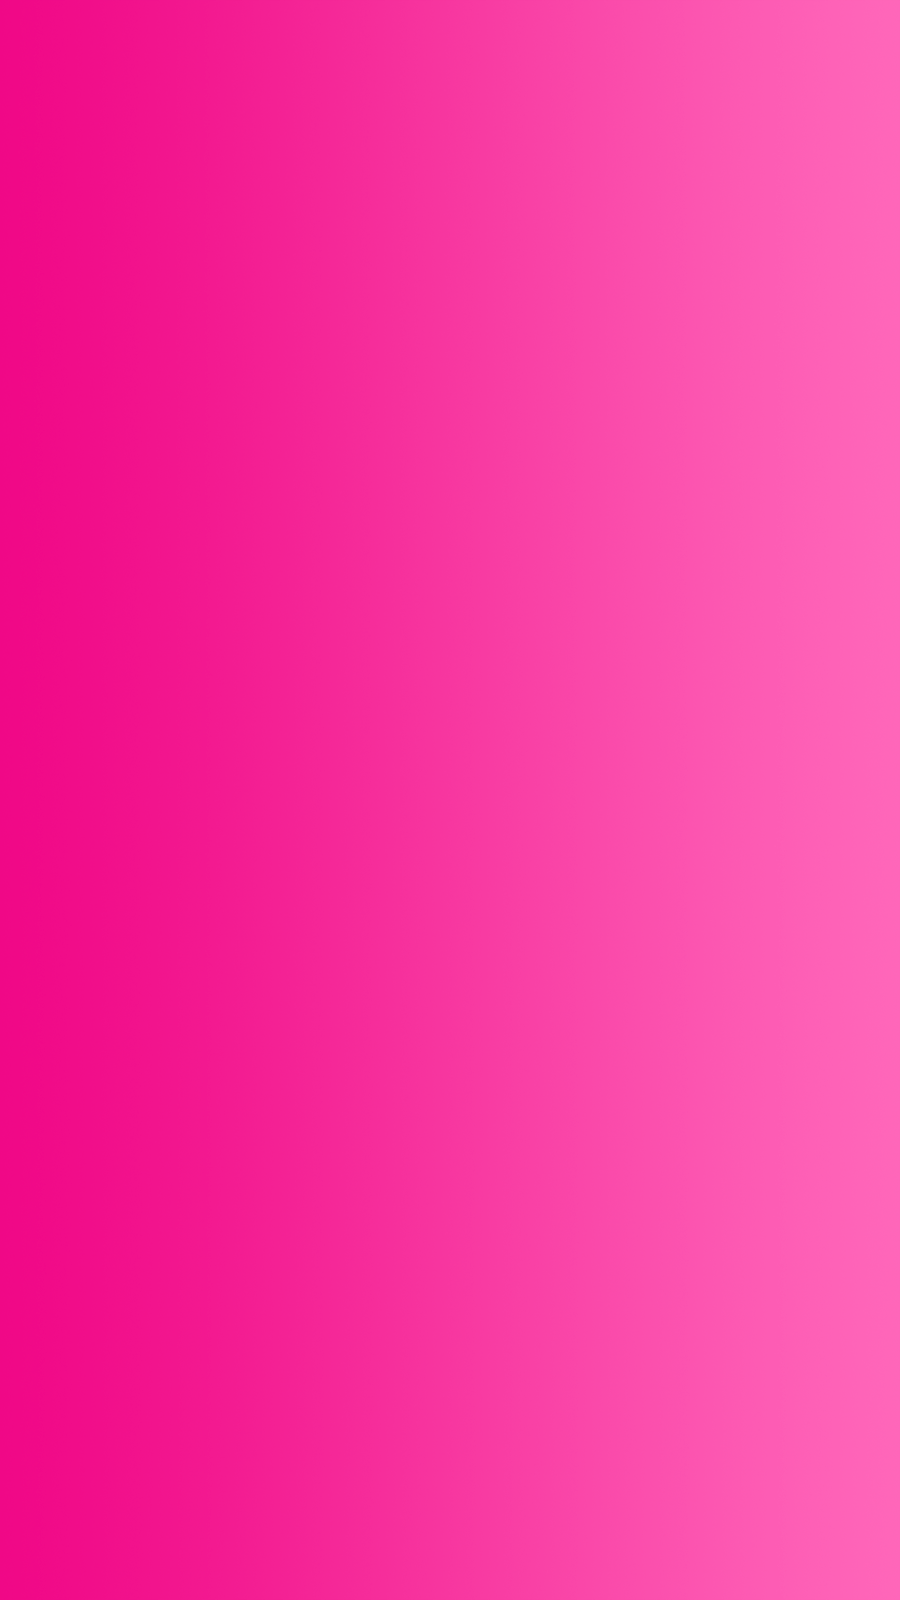 Pink HD Wallpaper For Mobile For Mobile Phones